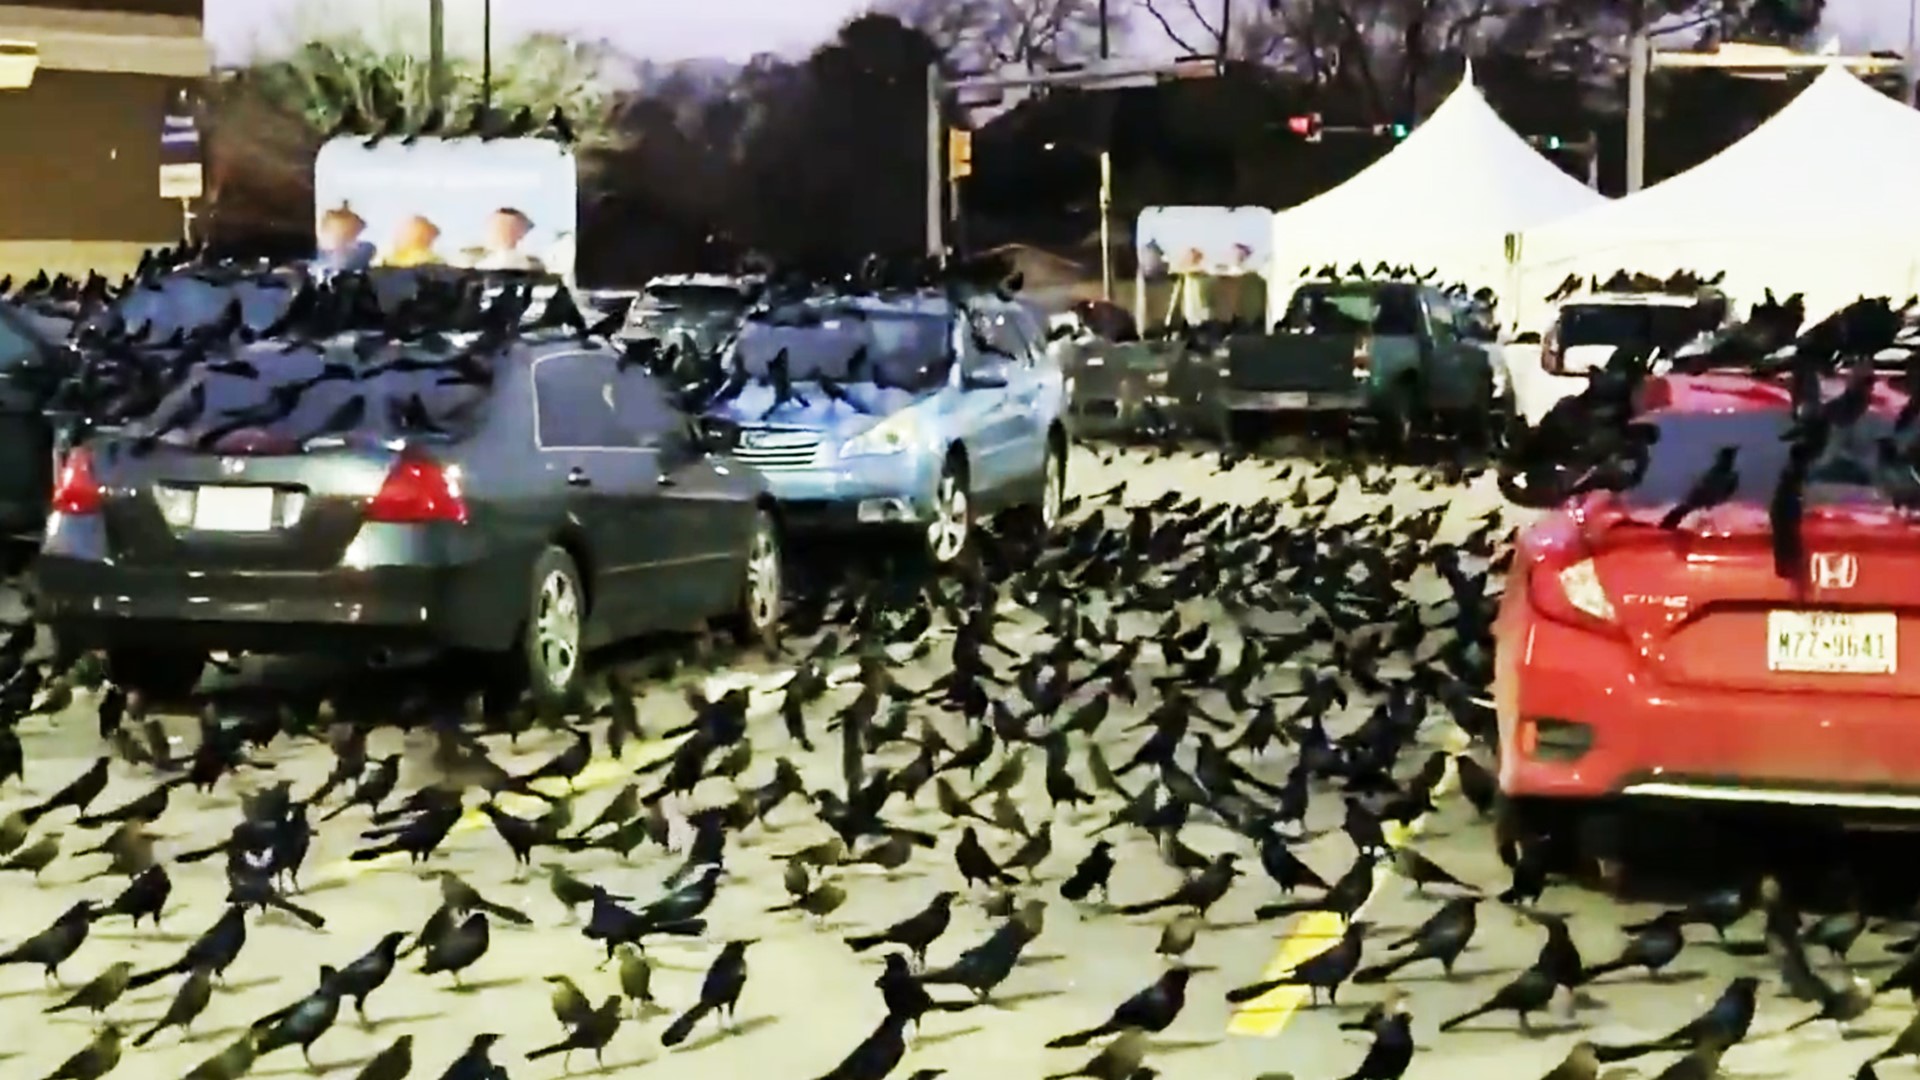 Grackles aren't an uncommon sight (or sound) in Houston, but this is crazy! KHOU 11 reporter Brett Buffington recorded this Jan. 29, 2020 at the Meyerland Kroger.